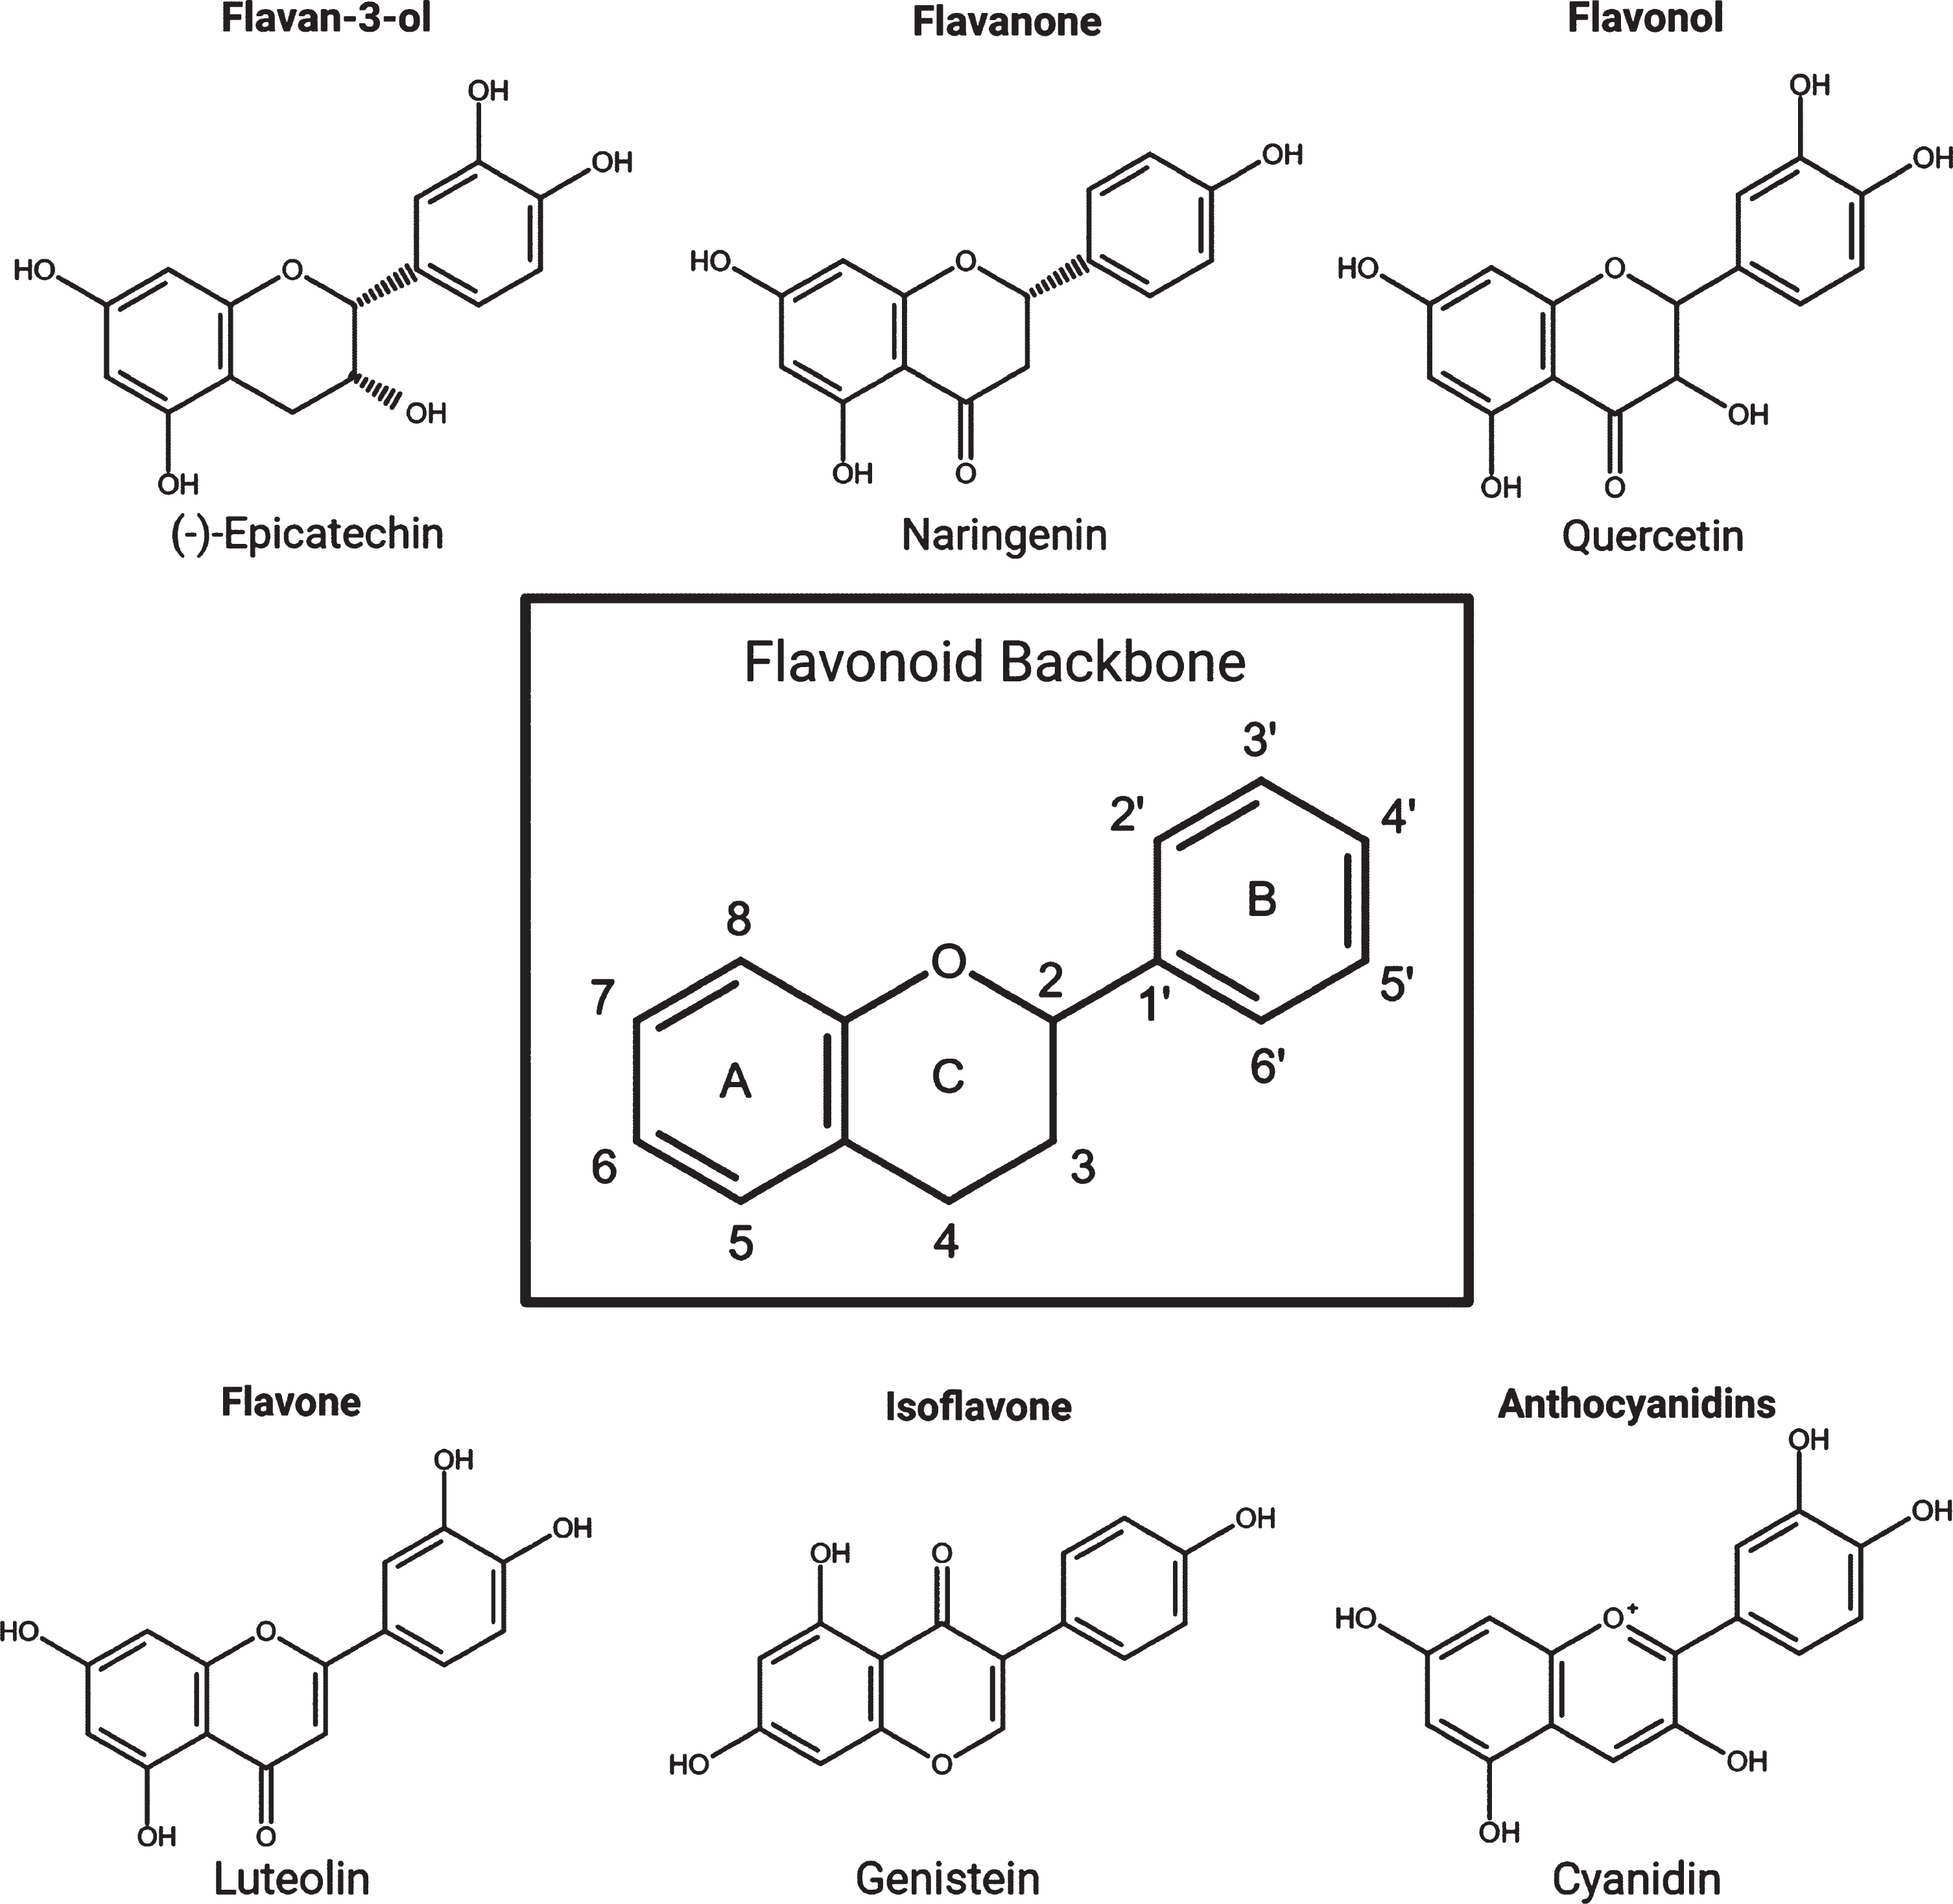 The flavonoid backbone and the six main subgroups with examples from each.